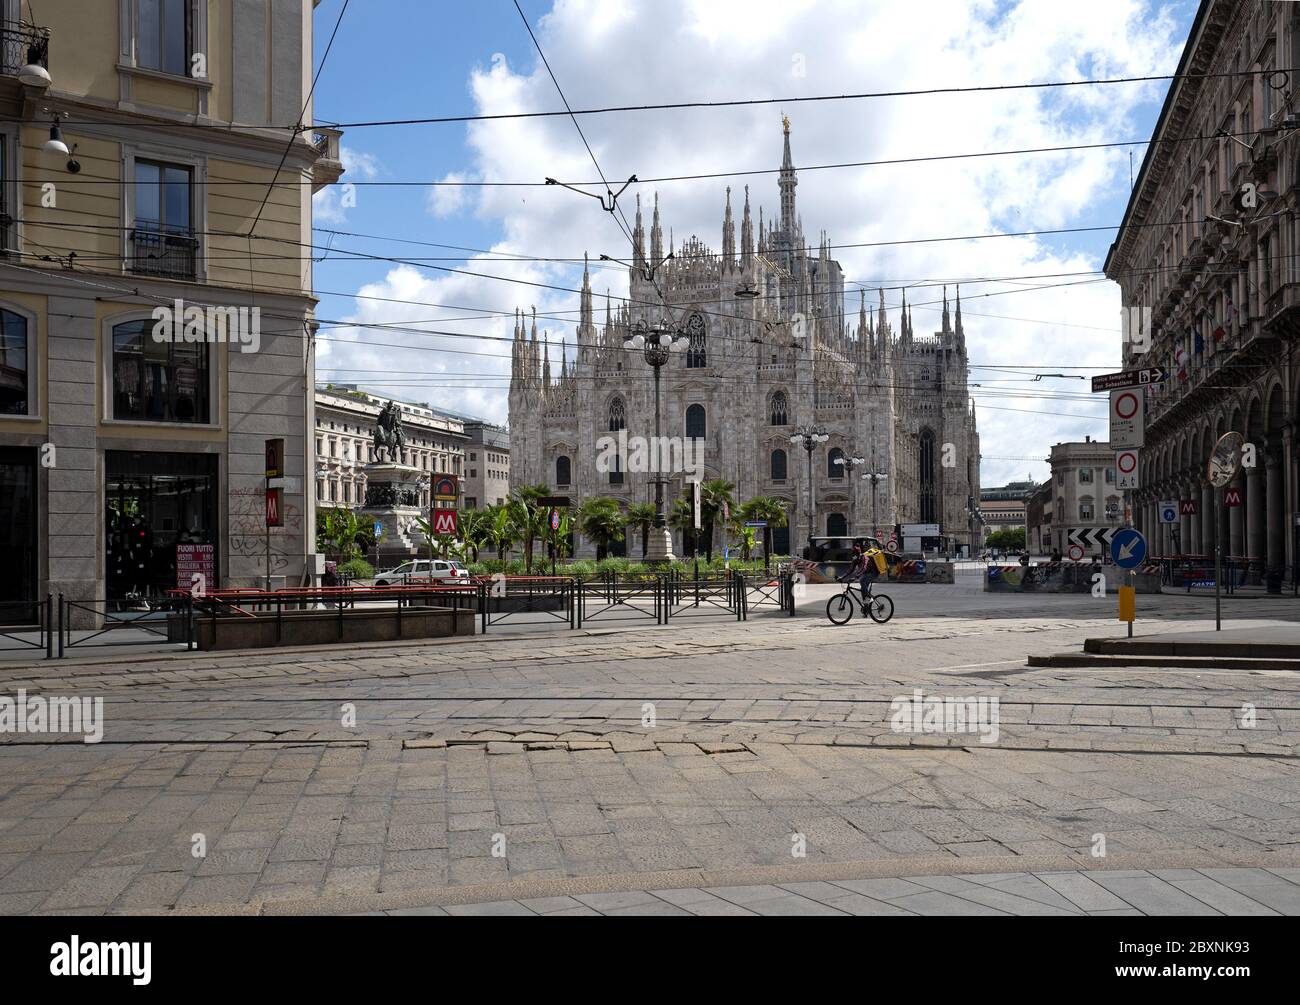 The desert city center with the Duomo's Cathedral during the lockdown due to the Covid-19 emergency, in Milan, Italy. Stock Photo